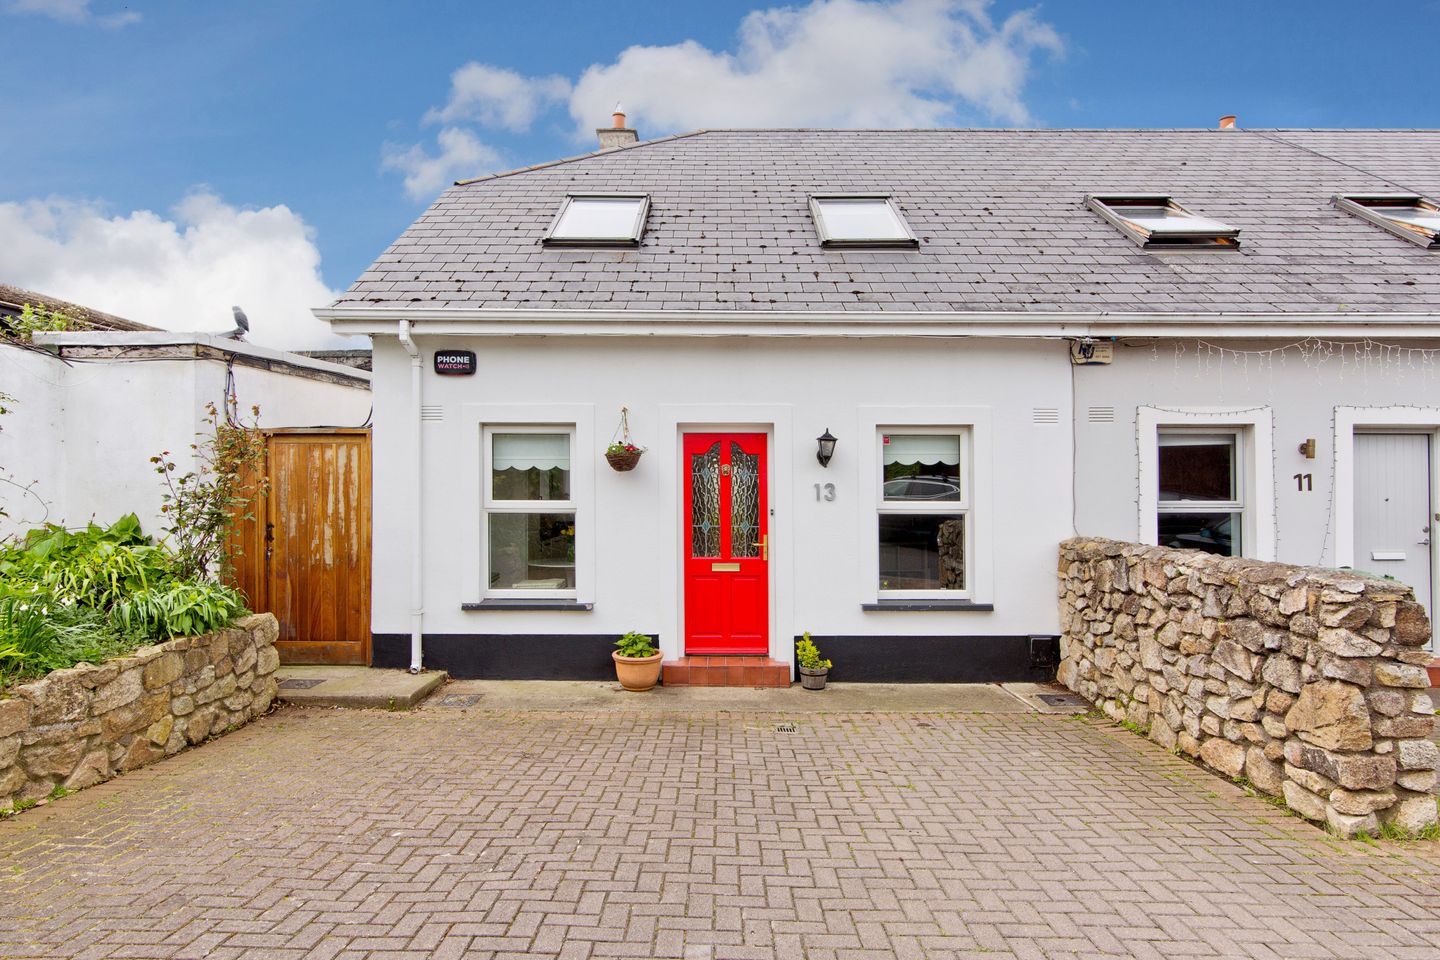 13 Grotto Avenue, Booterstown, Co Dublin, A94H2K8